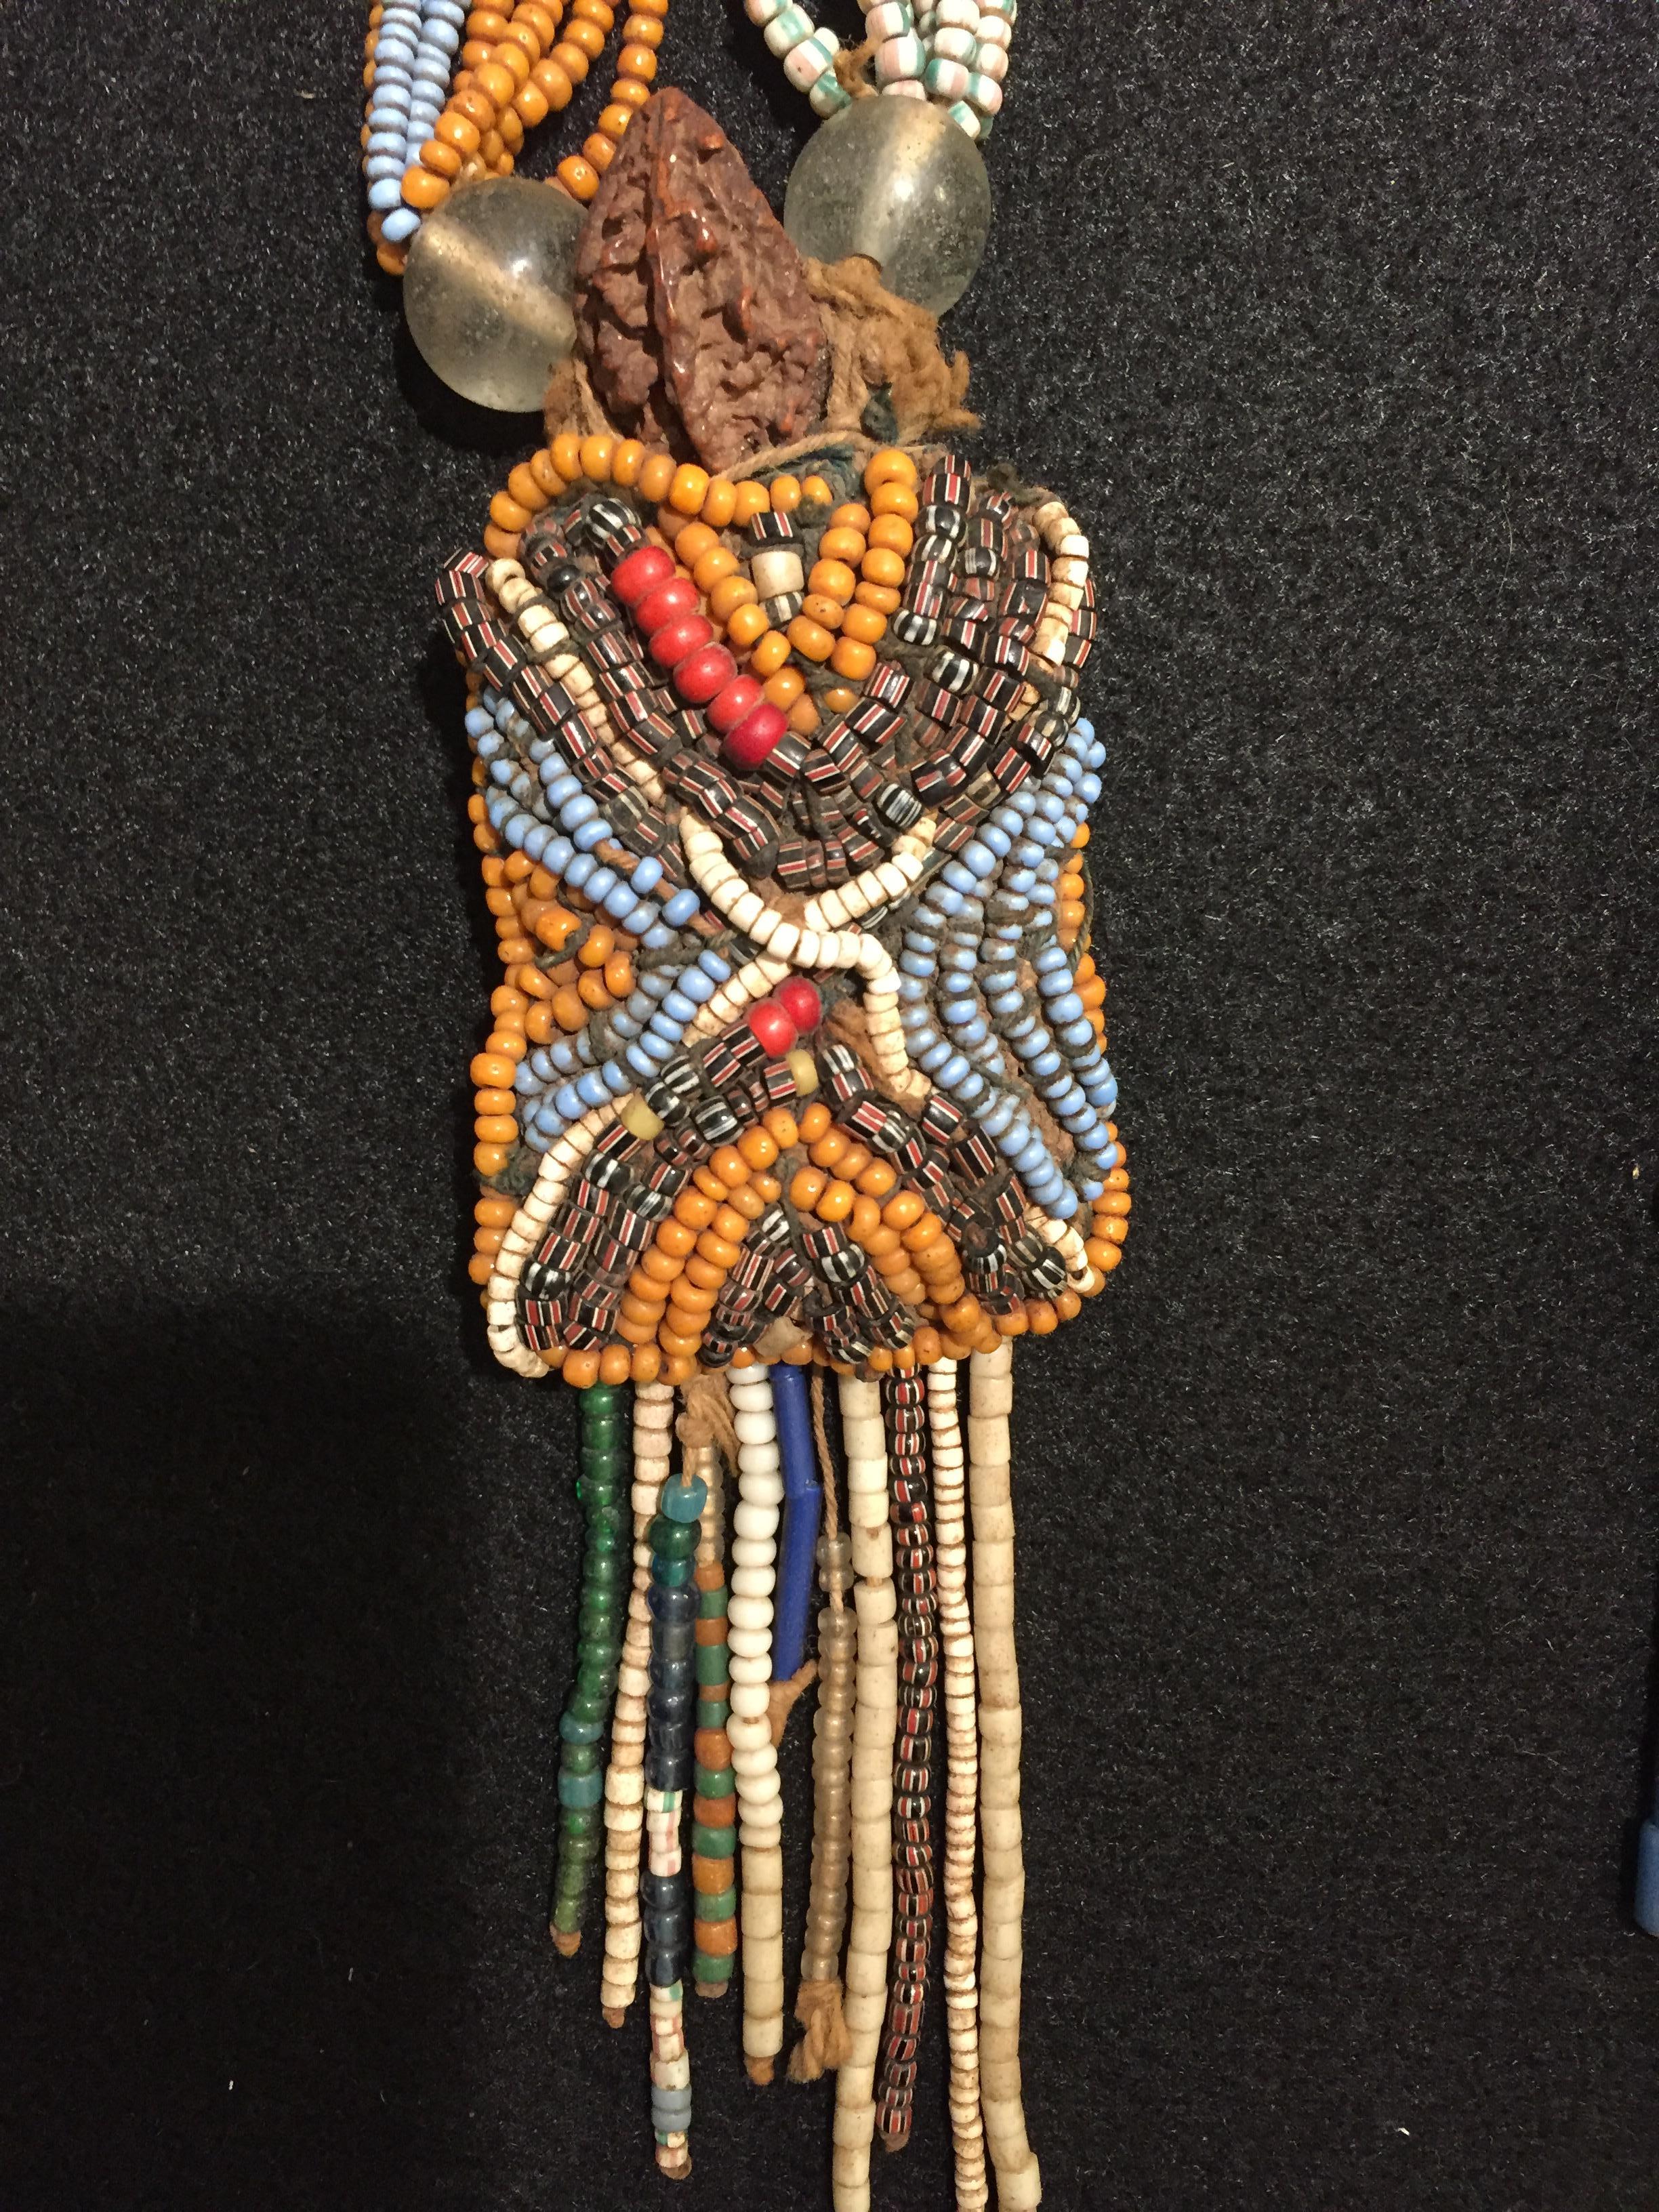 Tribal Yoruba African Diviner's Necklace with Glass Beads